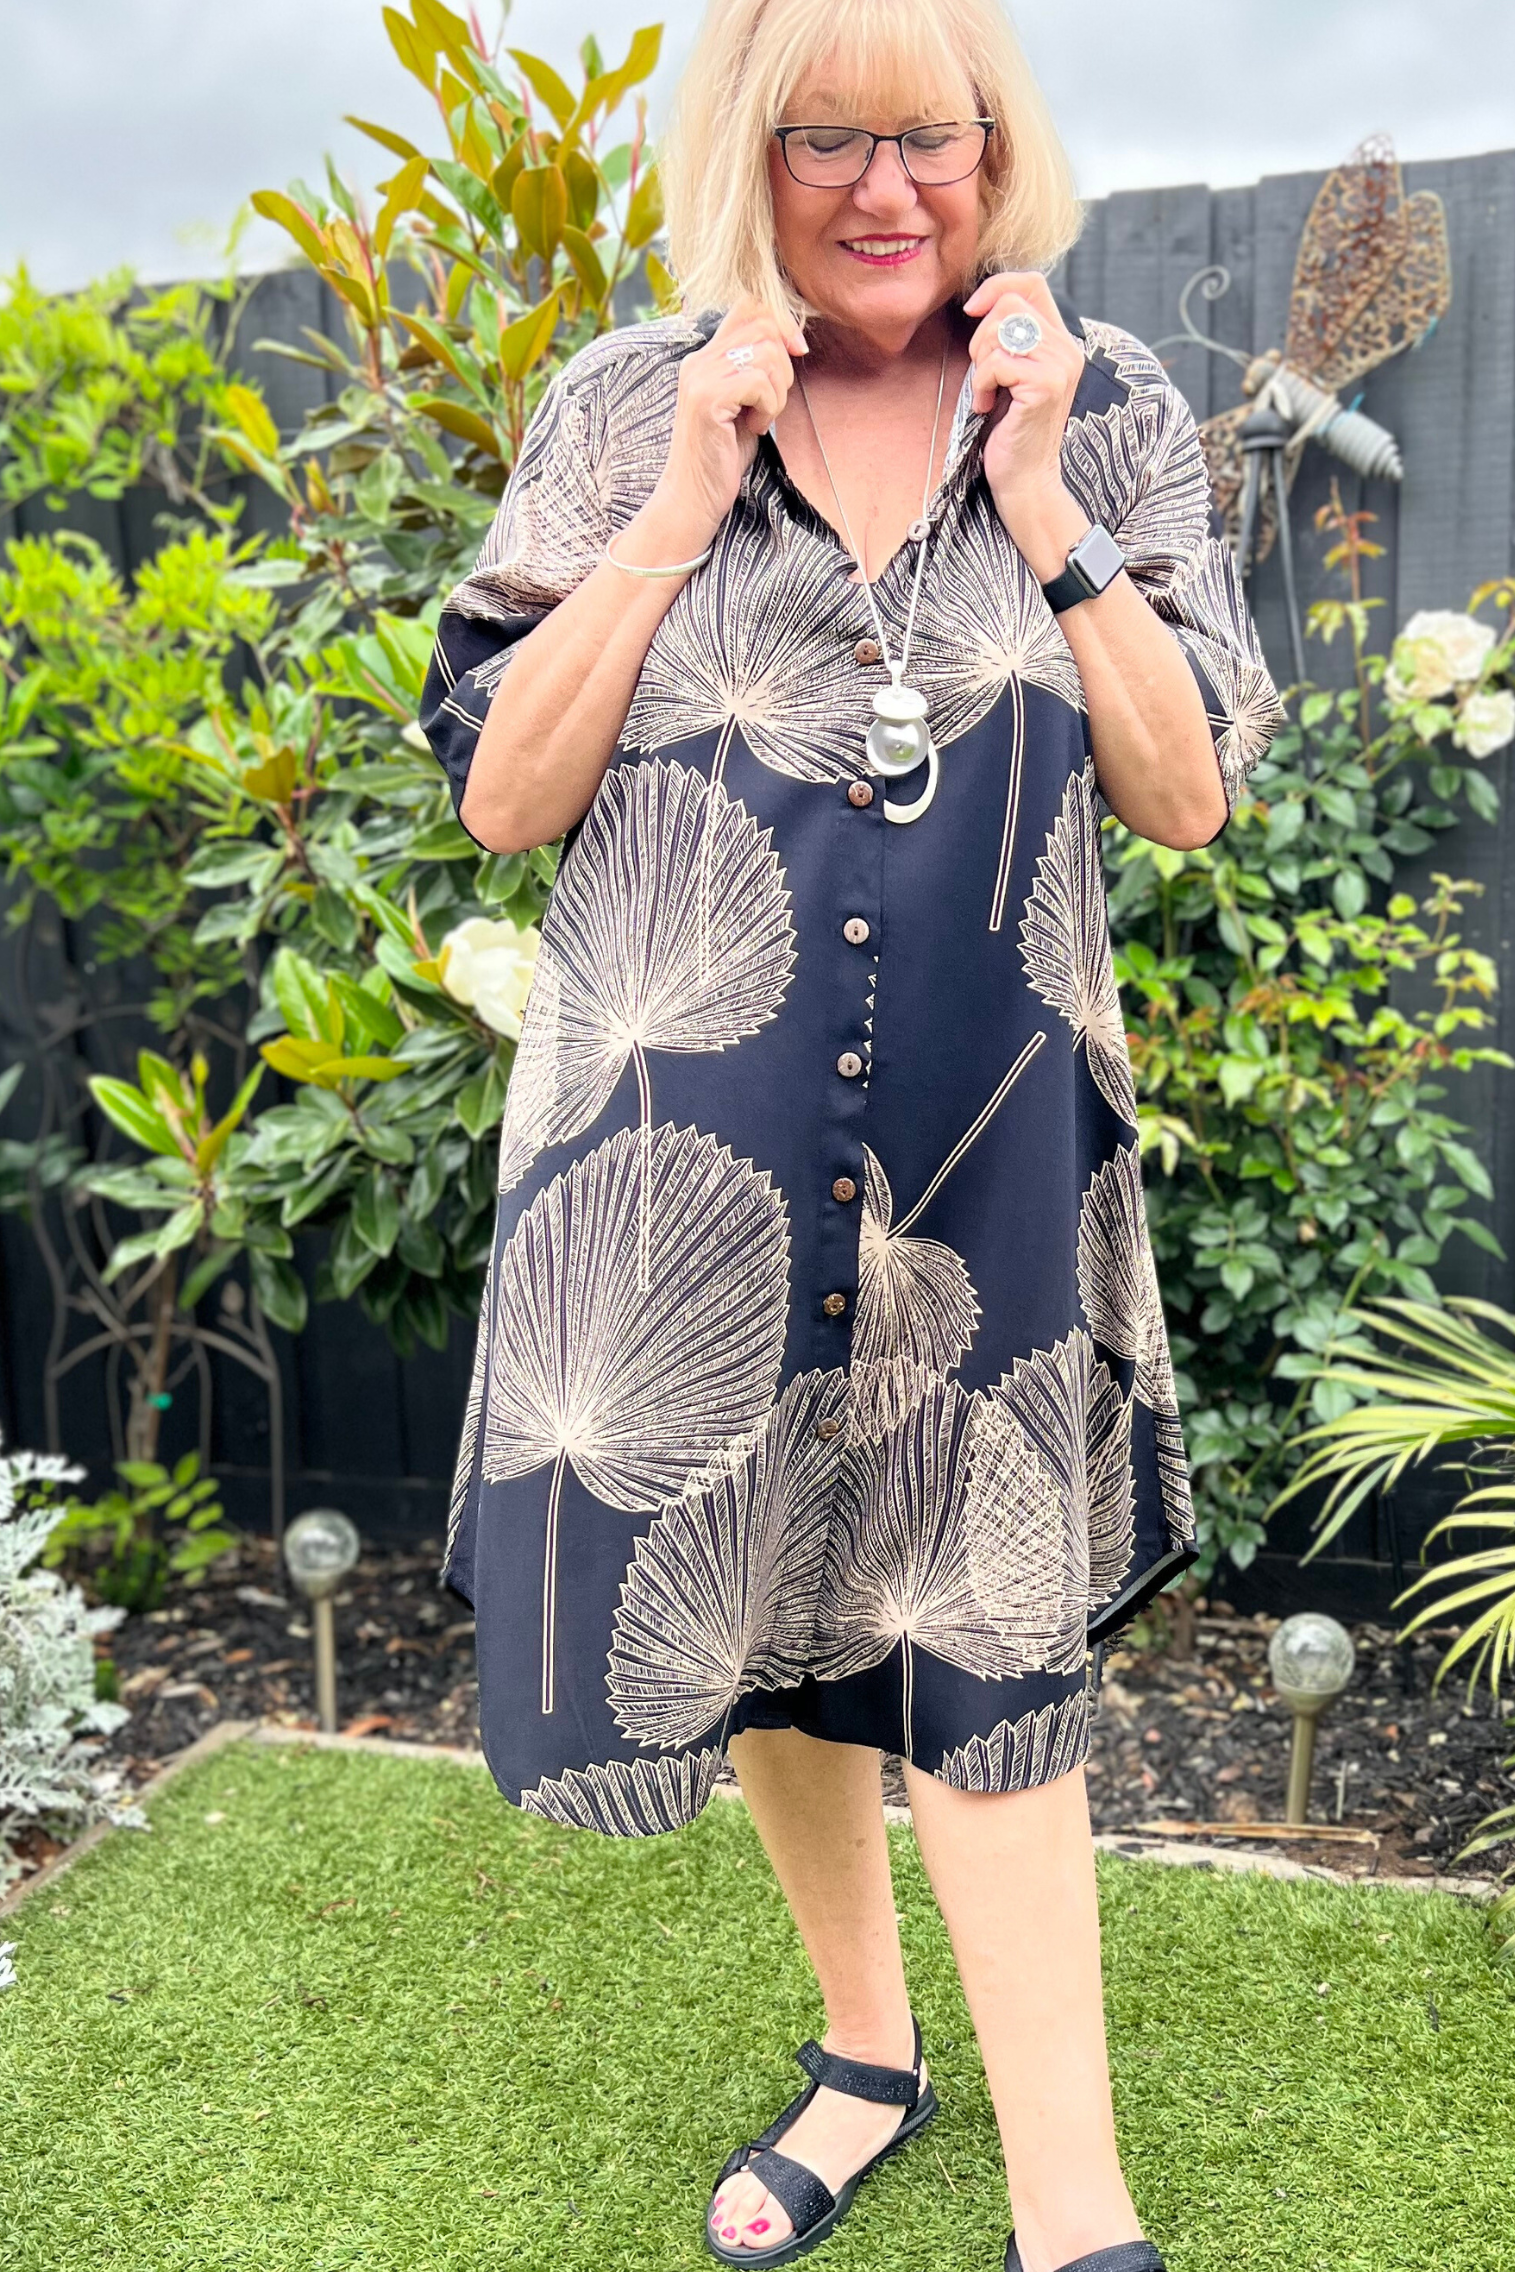 kita ku model in the shirt style dress pronto in a paolo print of fan black and mocha palm leaf set in a sunny garden.